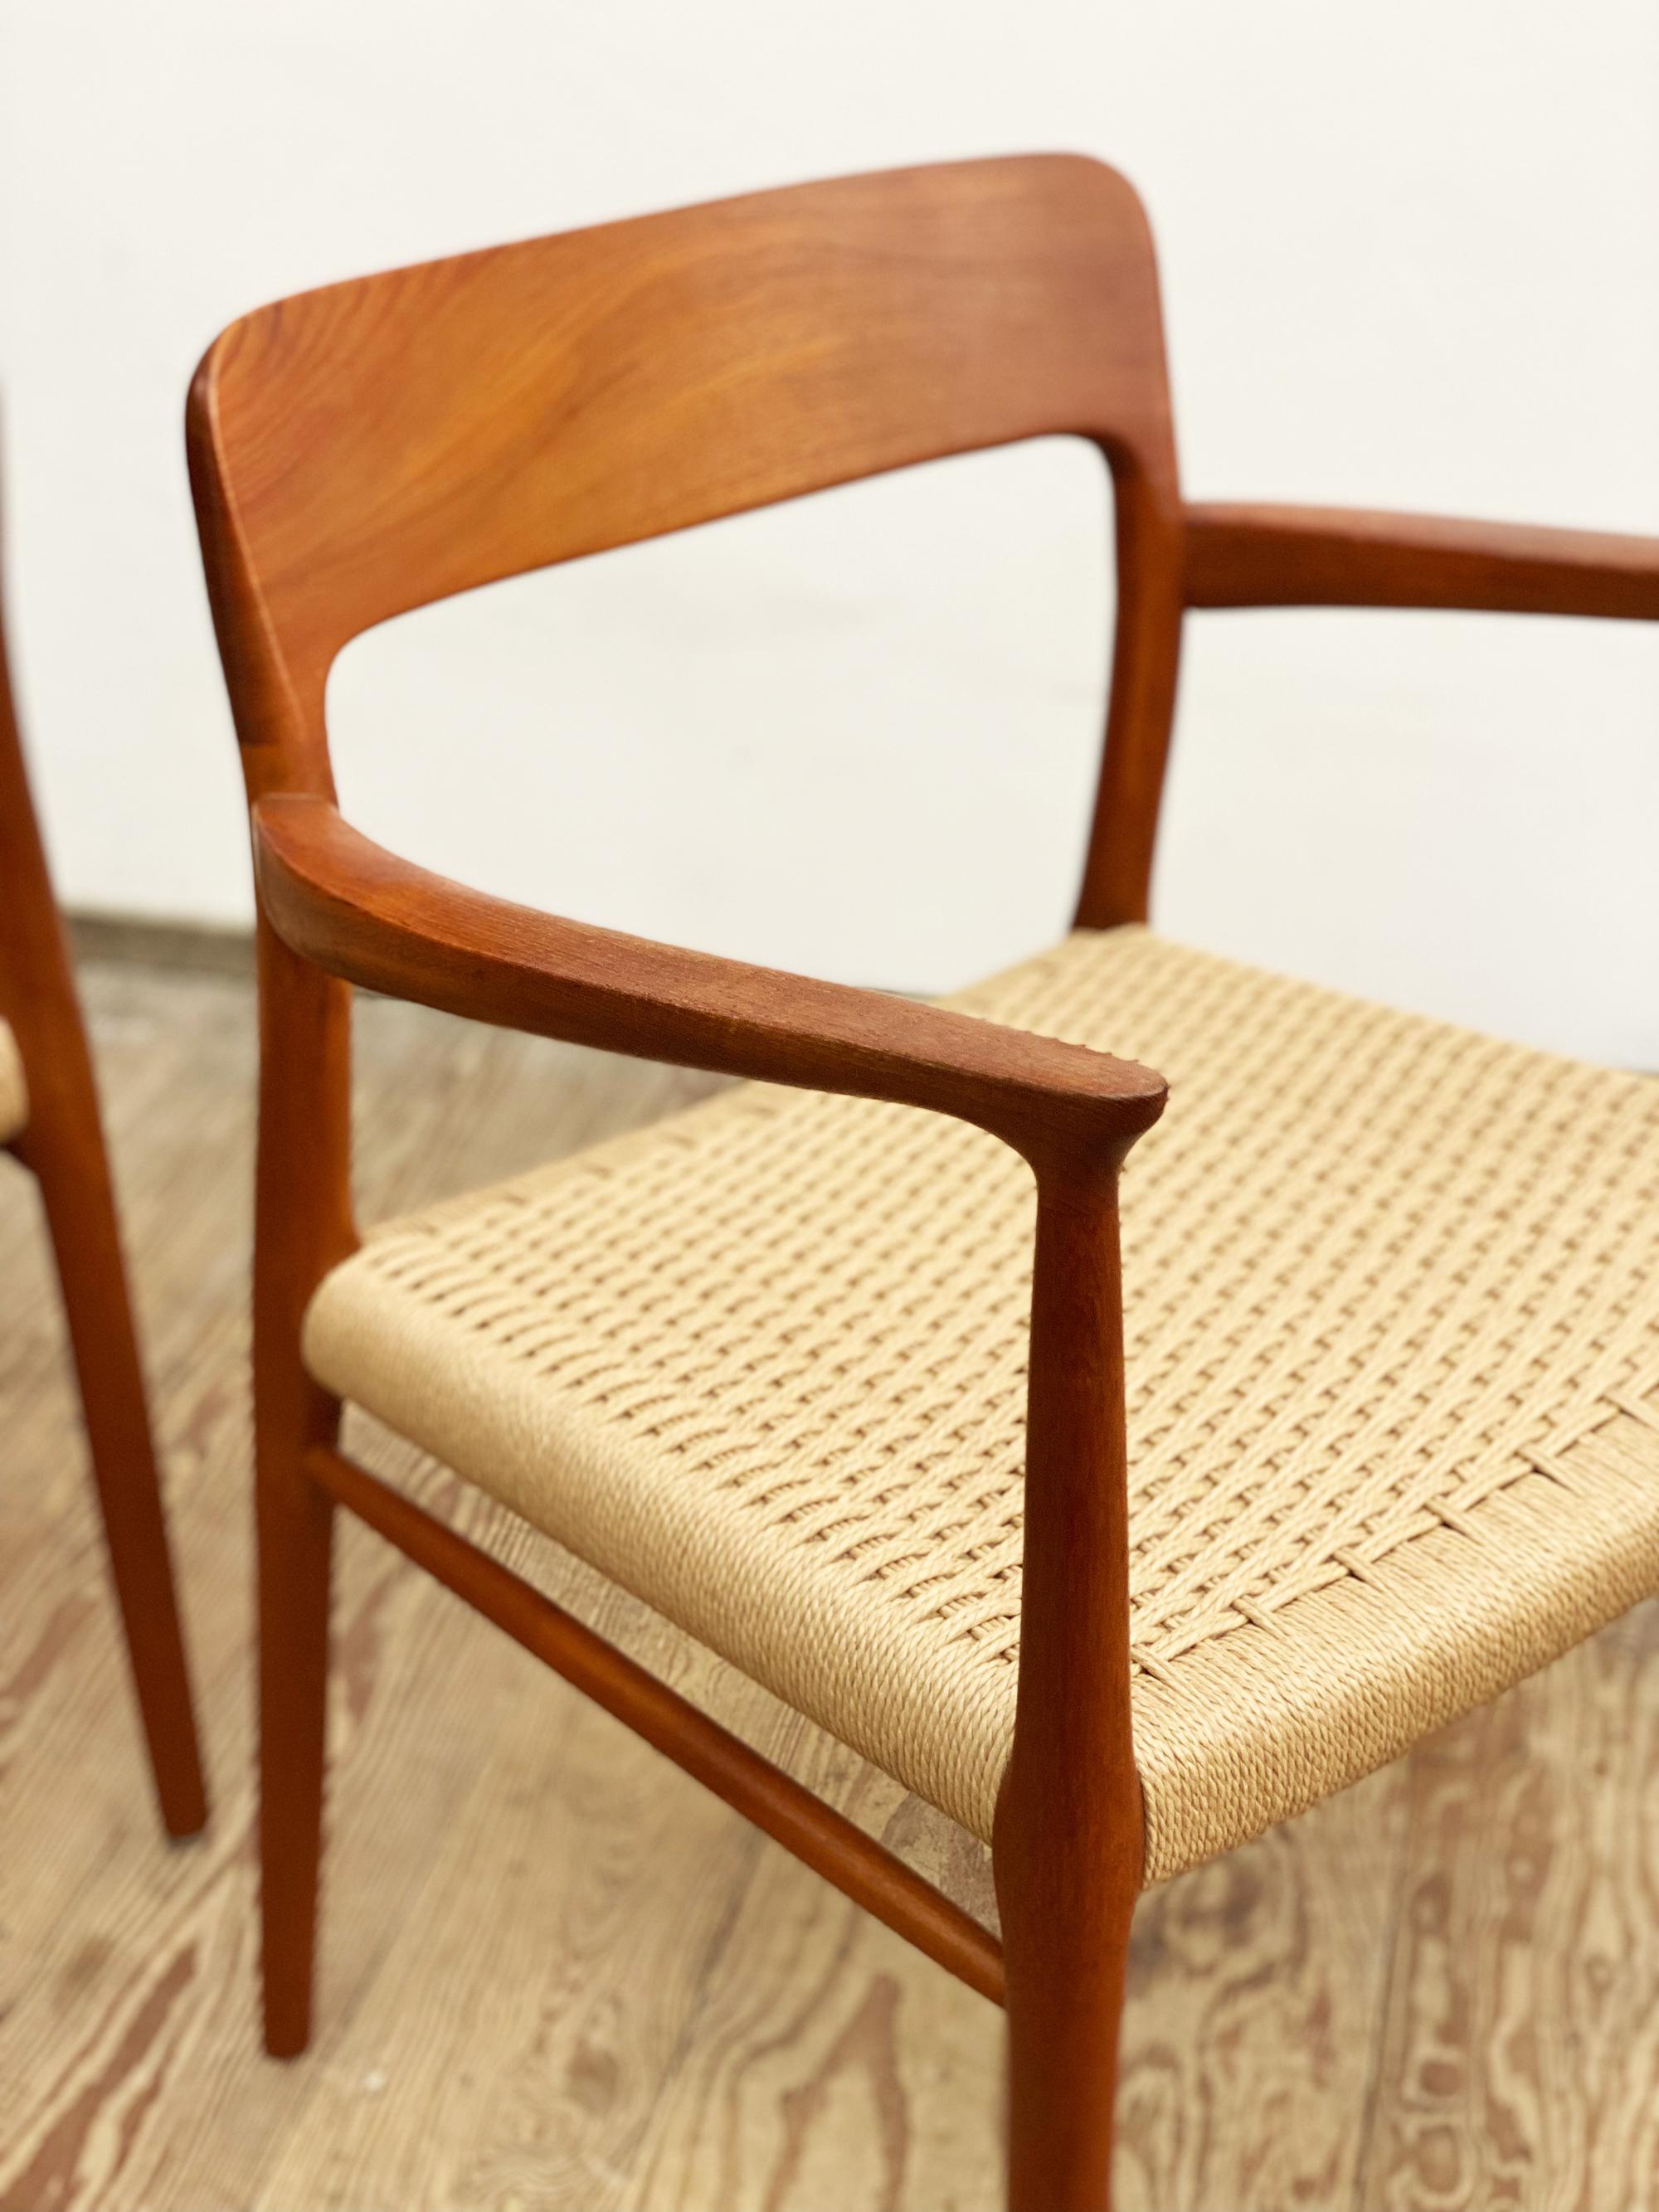 Pair of Mid-Century Teak Dining Chairs #56 by Niels O. Møller for J. L. Moller In Good Condition For Sale In München, Bavaria